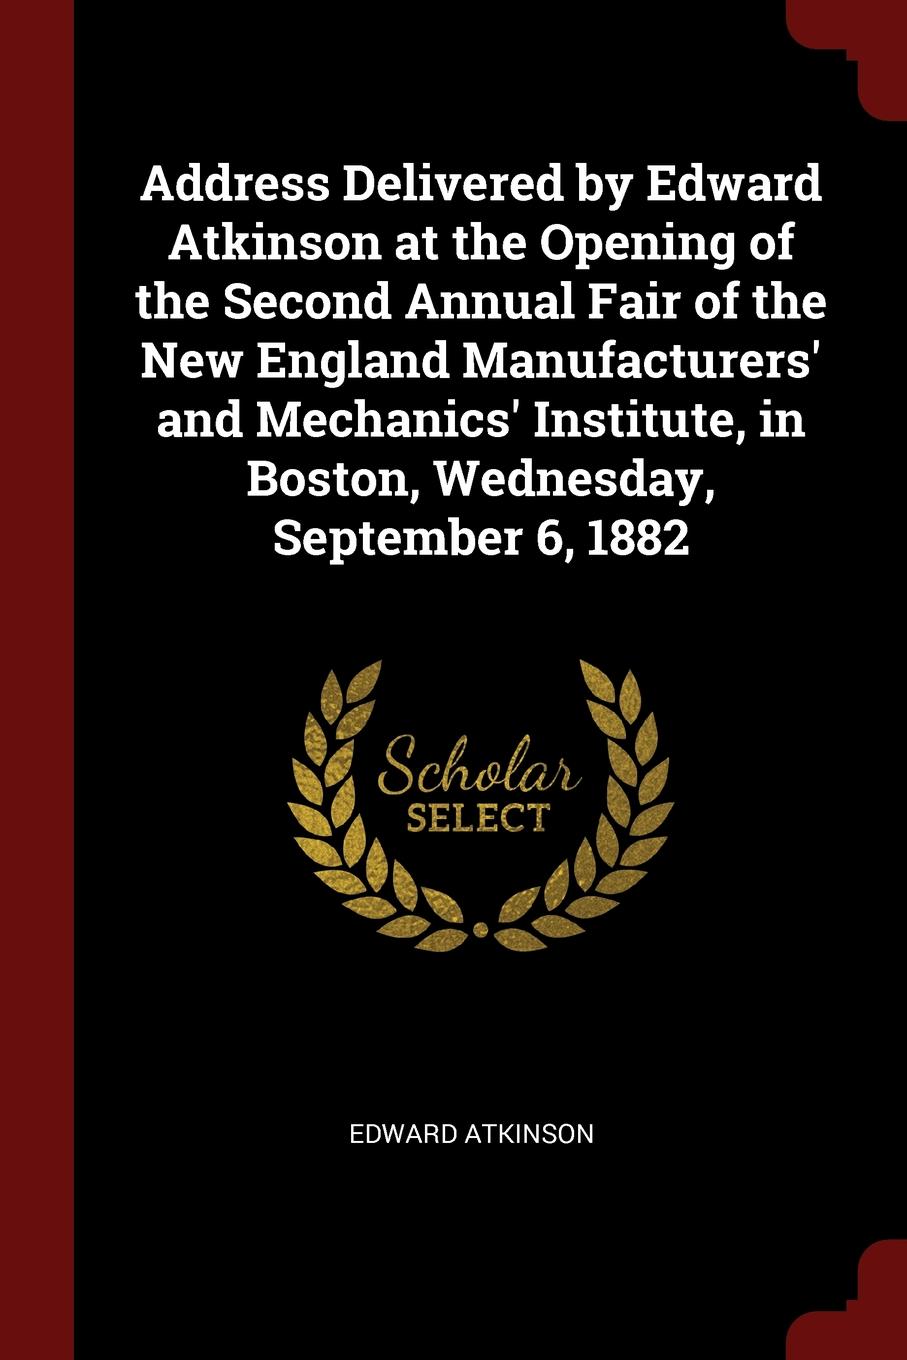 Address Delivered by Edward Atkinson at the Opening of the Second Annual Fair of the New England Manufacturers. and Mechanics. Institute, in Boston, Wednesday, September 6, 1882